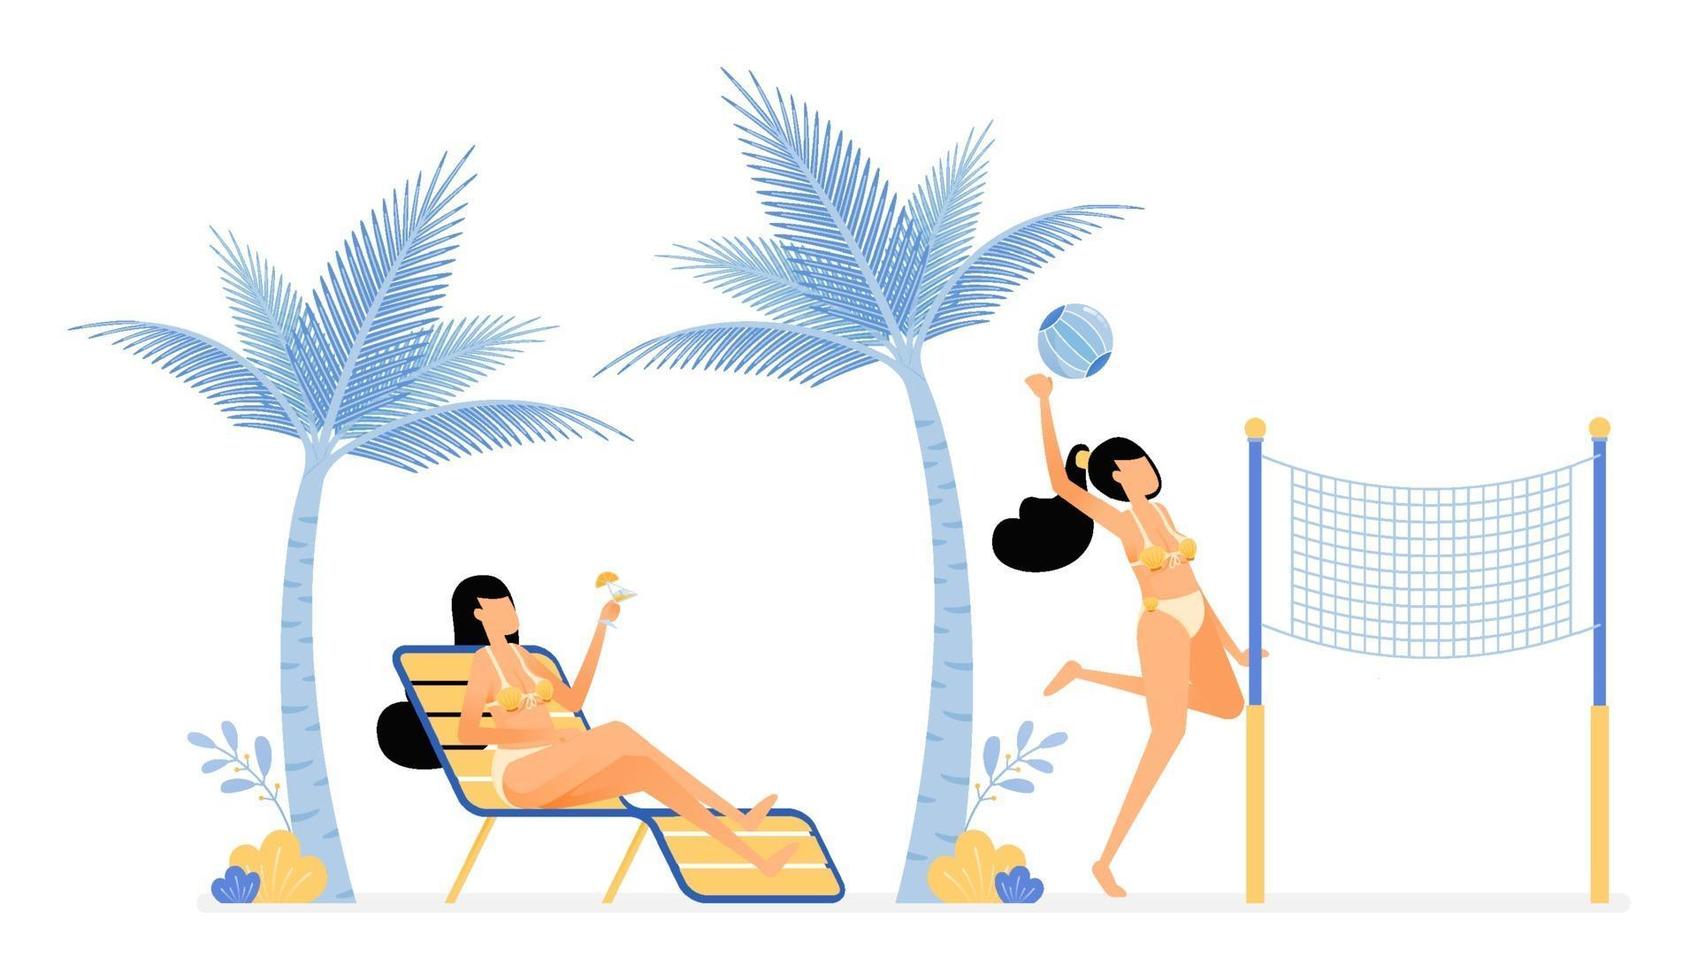 happy vacation illustration of women relaxing and enjoying holiday on beach by lying under coconut trees or playing volleyball Vector design can be used for poster banner ad website web mobile marketing